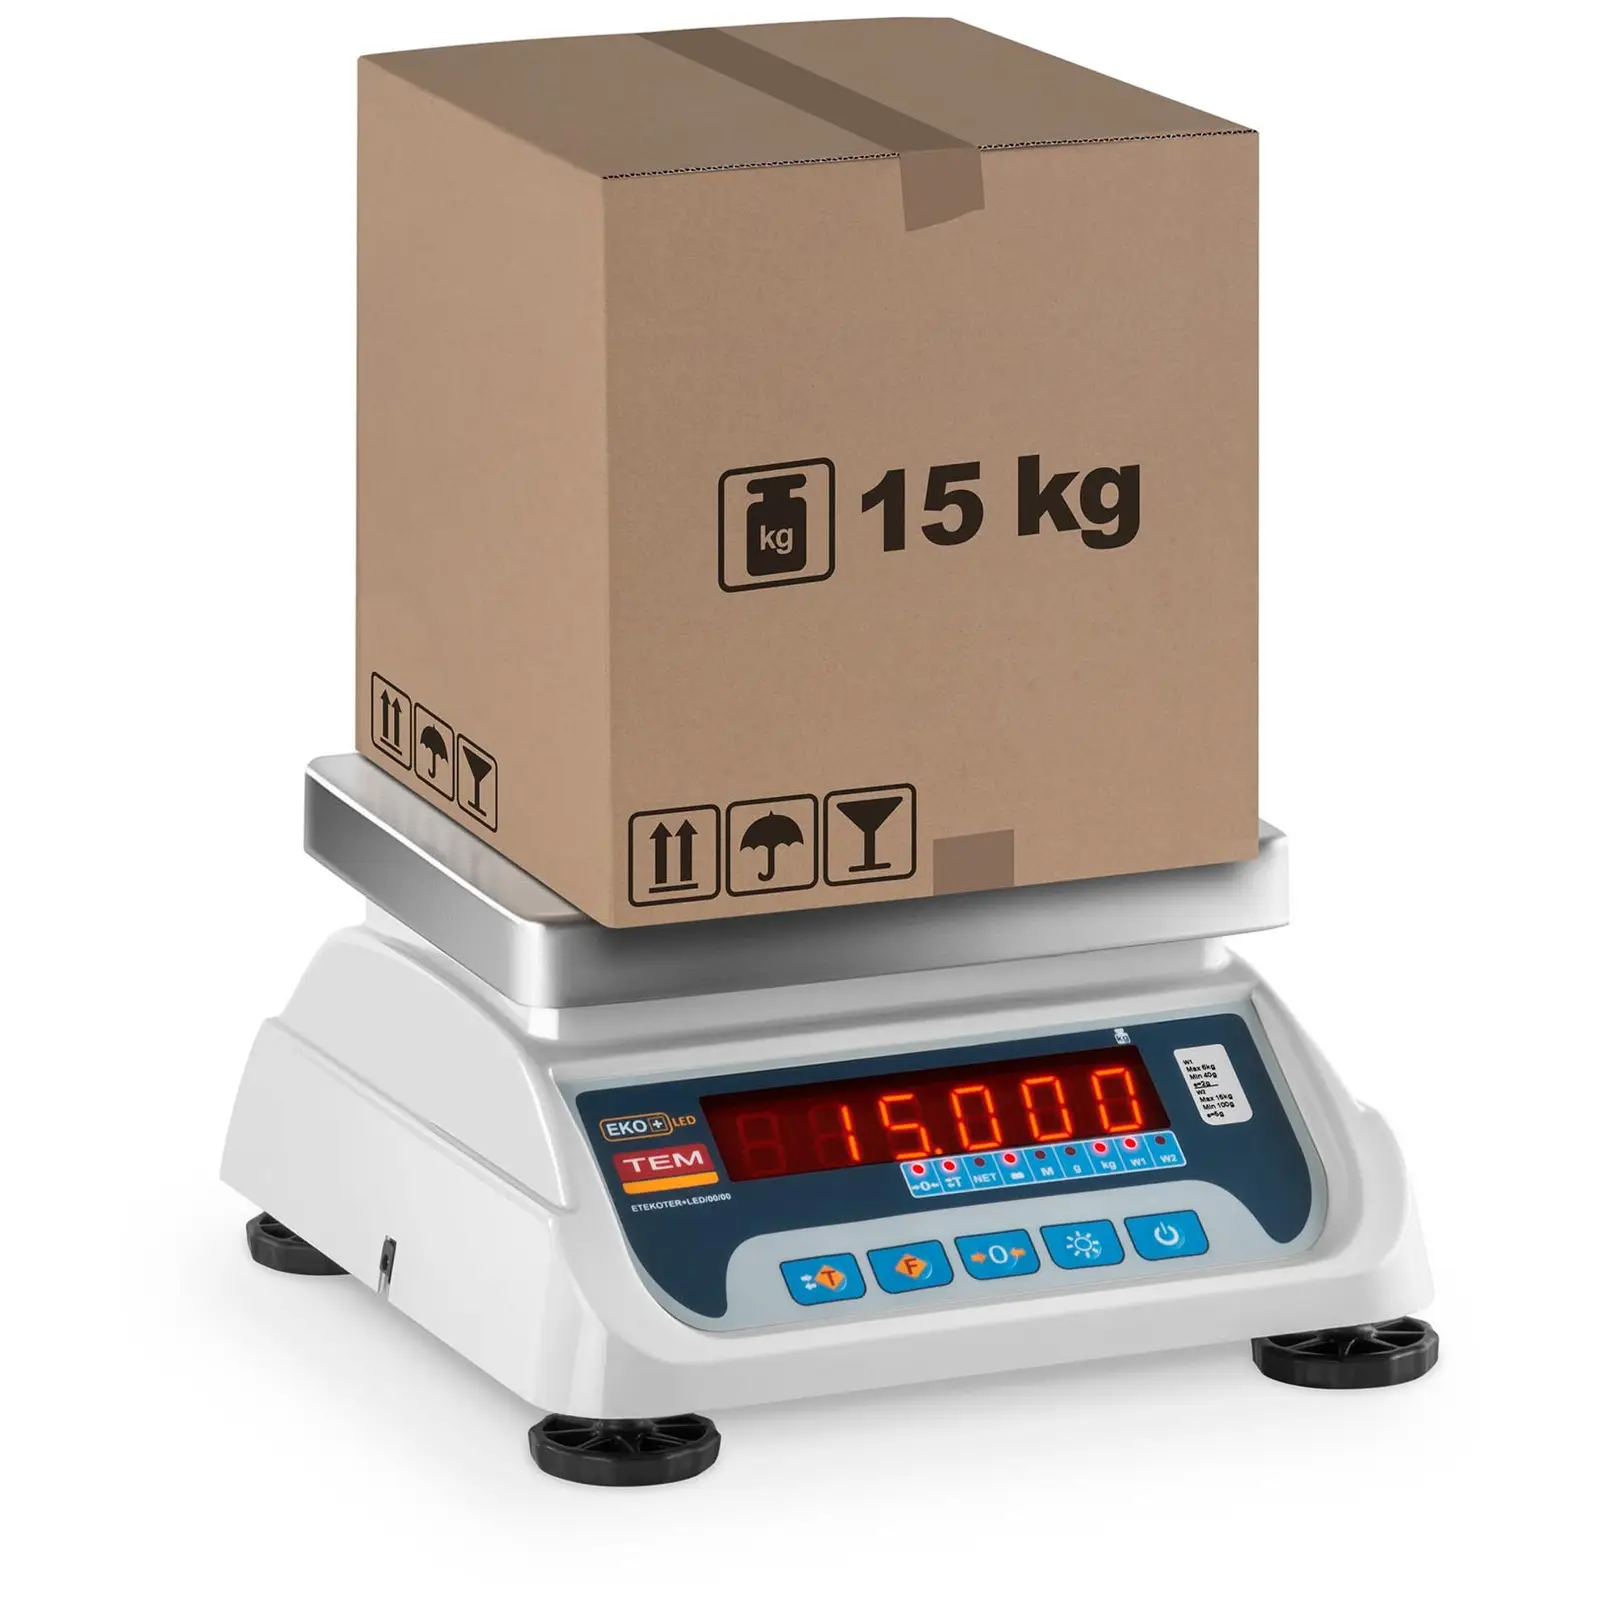 Table Scale - calibrated - 6 kg / 2 g - 15 kg / 5 g - LED